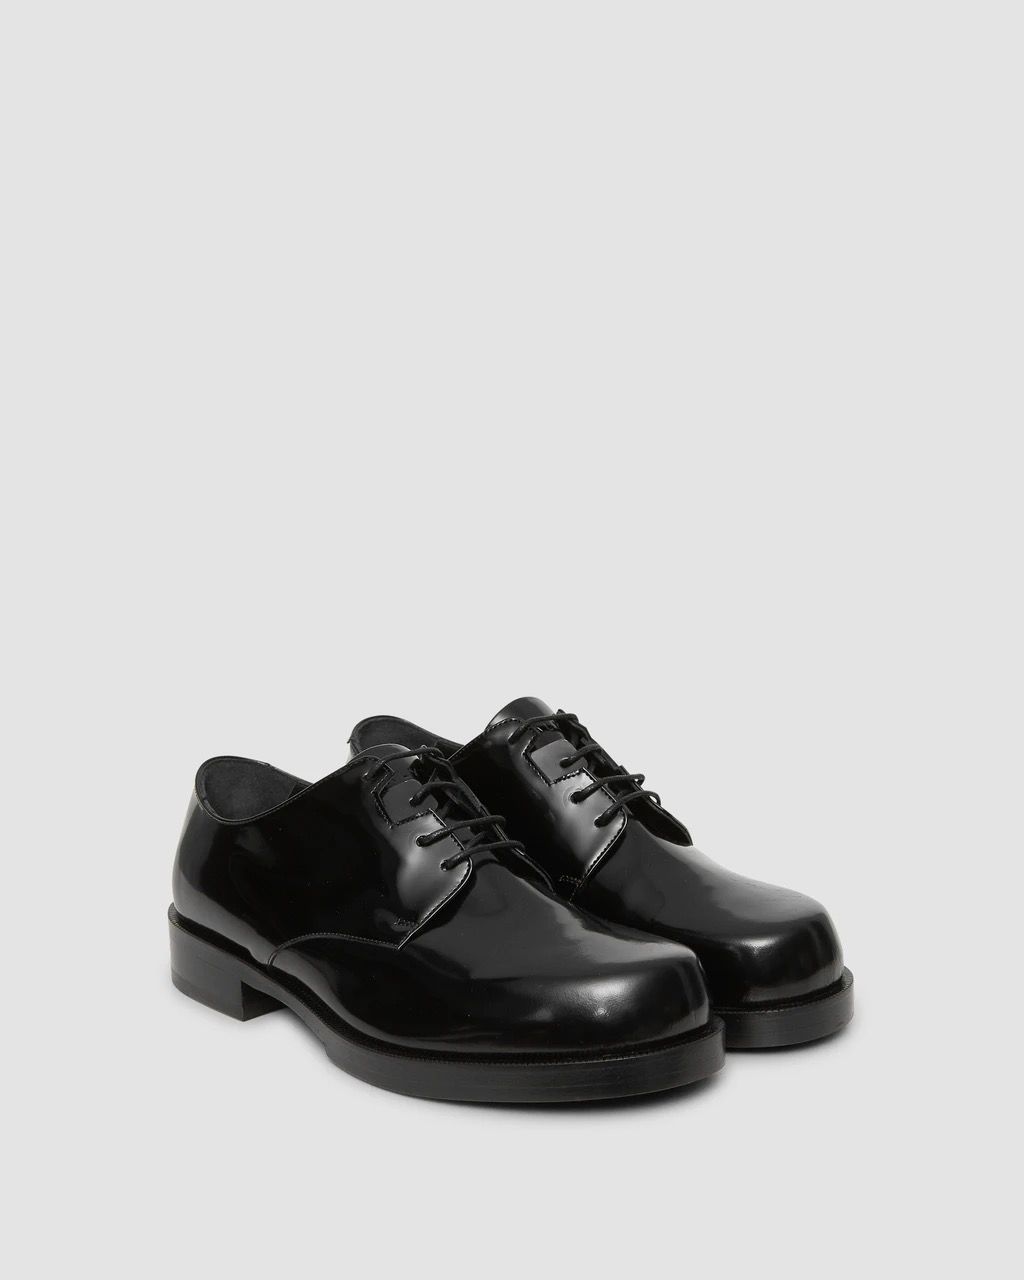 Pre-owned 1017 Alyx 9sm X Alyx 1017 Alyx Black Leather Derby Shoes